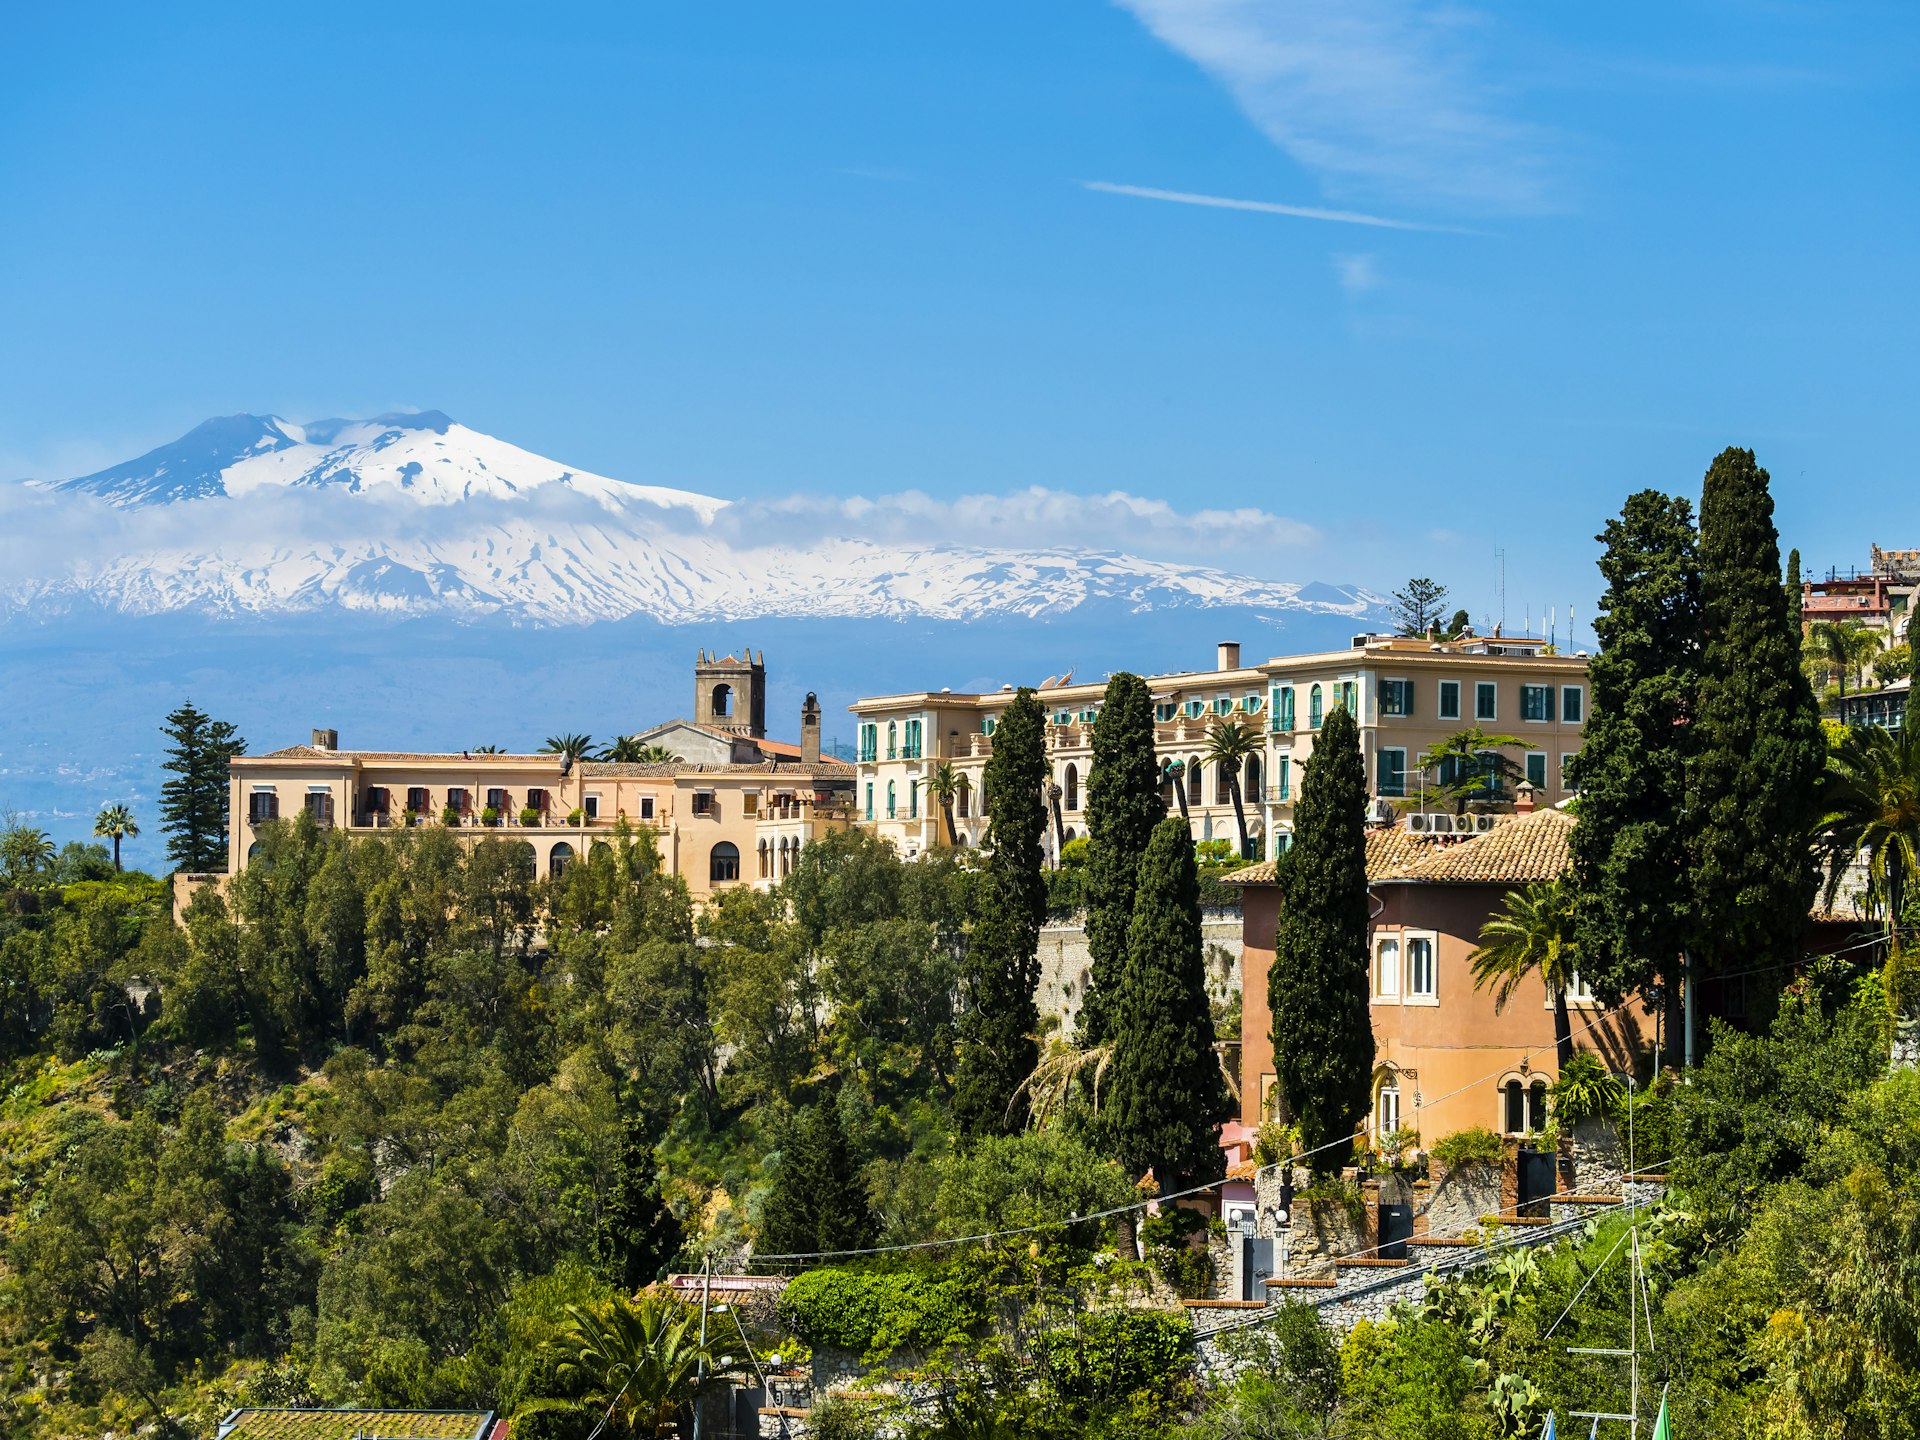 Italy, Sicily, Taormina, view to hotel with Mount Etna in the background